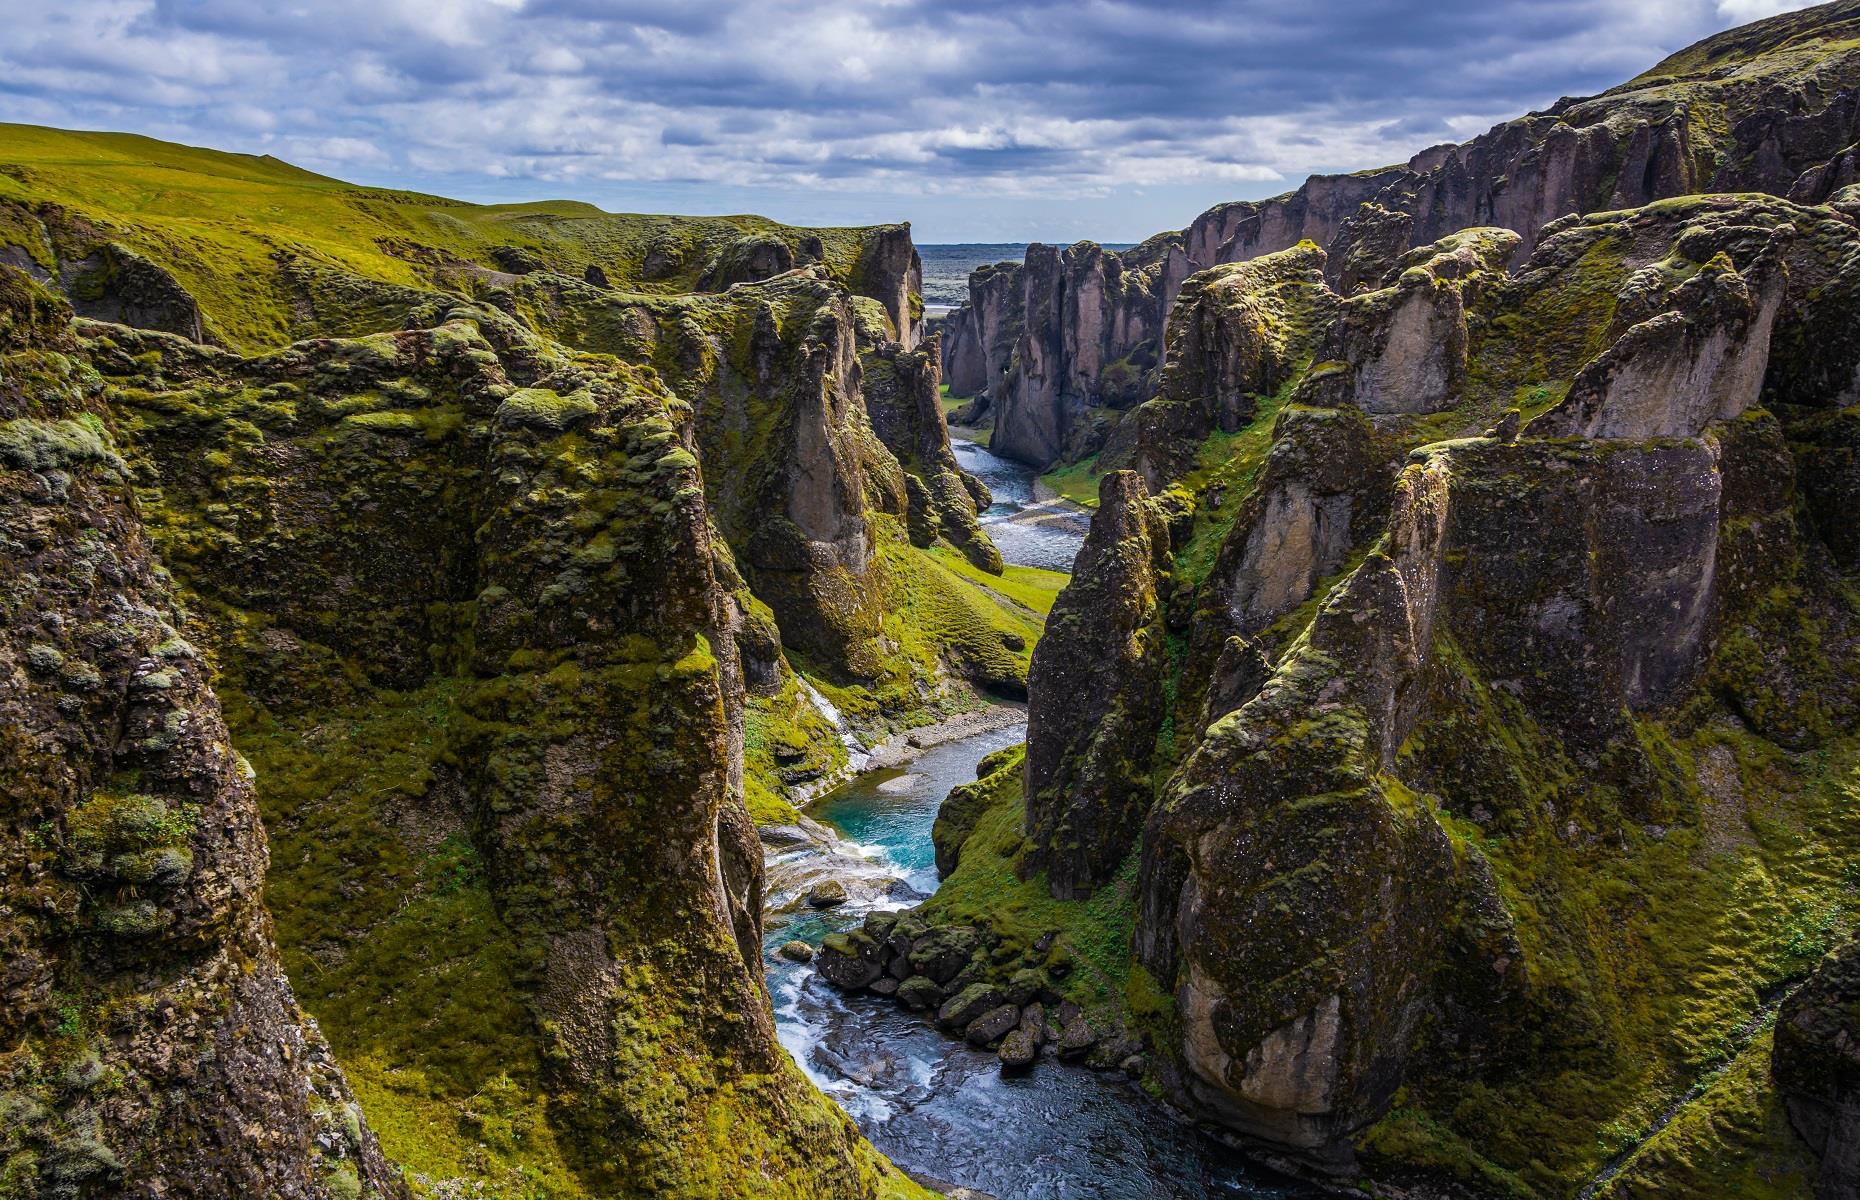 <p>A natural landscape that is almost too awe-inspiring to believe, Fjaðrárgljúfur was carved through the earth over millions of years, all thanks to the natural flow of the Fjaðrá River. The imposing canyon can be found to the west of the village of Kirkjubæjarklaustur, on the island's south coast, and boasts enchanting walking paths that weave among towering rock formations. Soak up the unparalleled scenery from the top, or head down to immerse yourself in the quiet beauty of the canyon's glacial brook.</p>